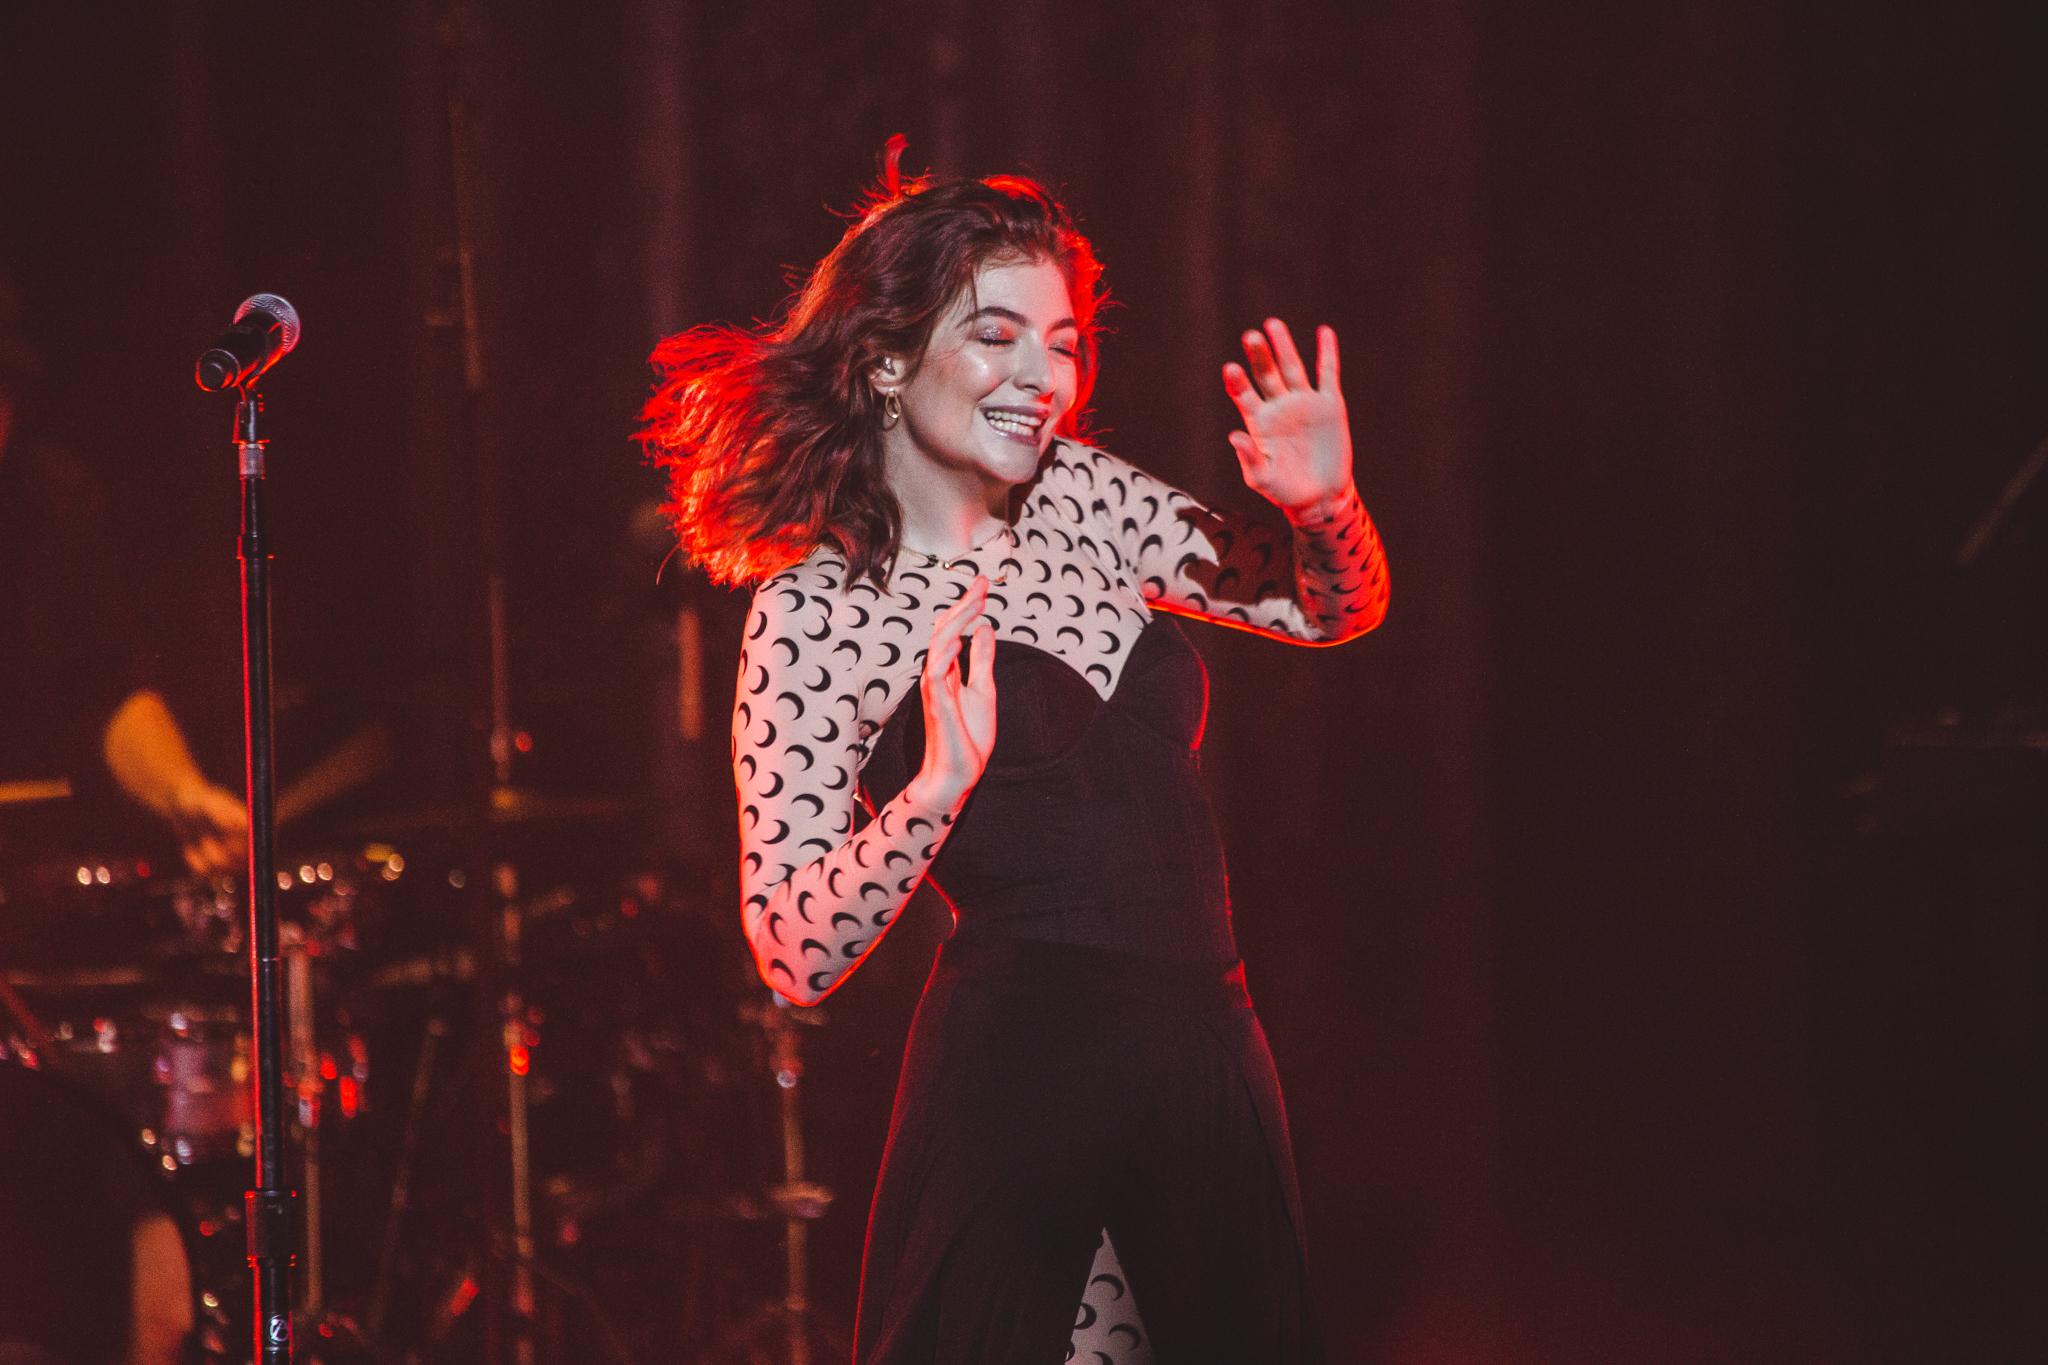 Lorde performs at the Manchester Apollo on the opening night of her 2017 18 world tour